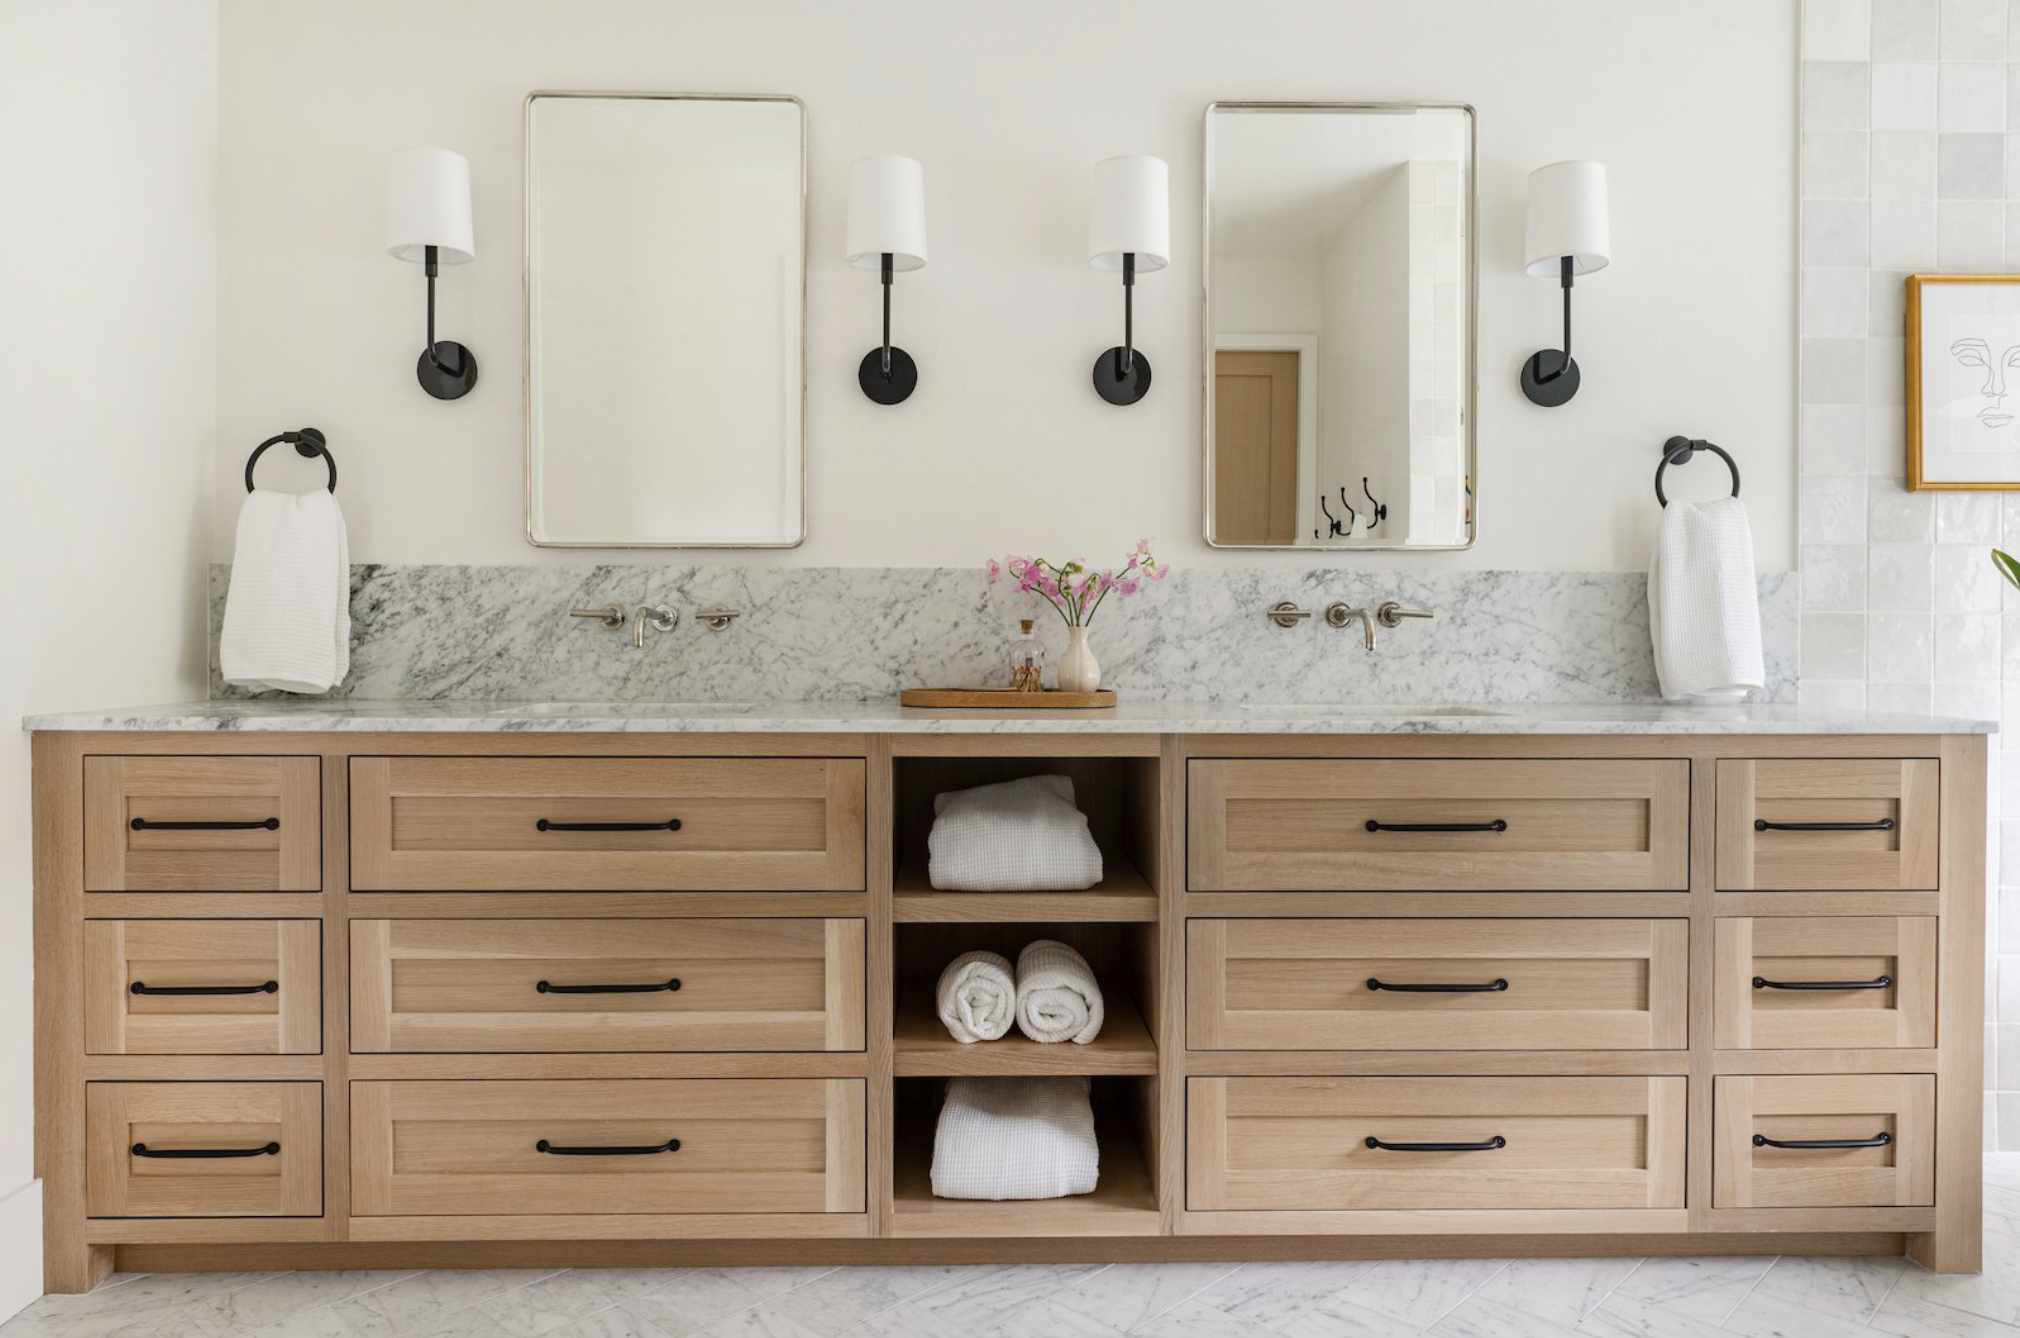 20 Bathroom Cabinet Organizing Ideas to Conceal All Clutter